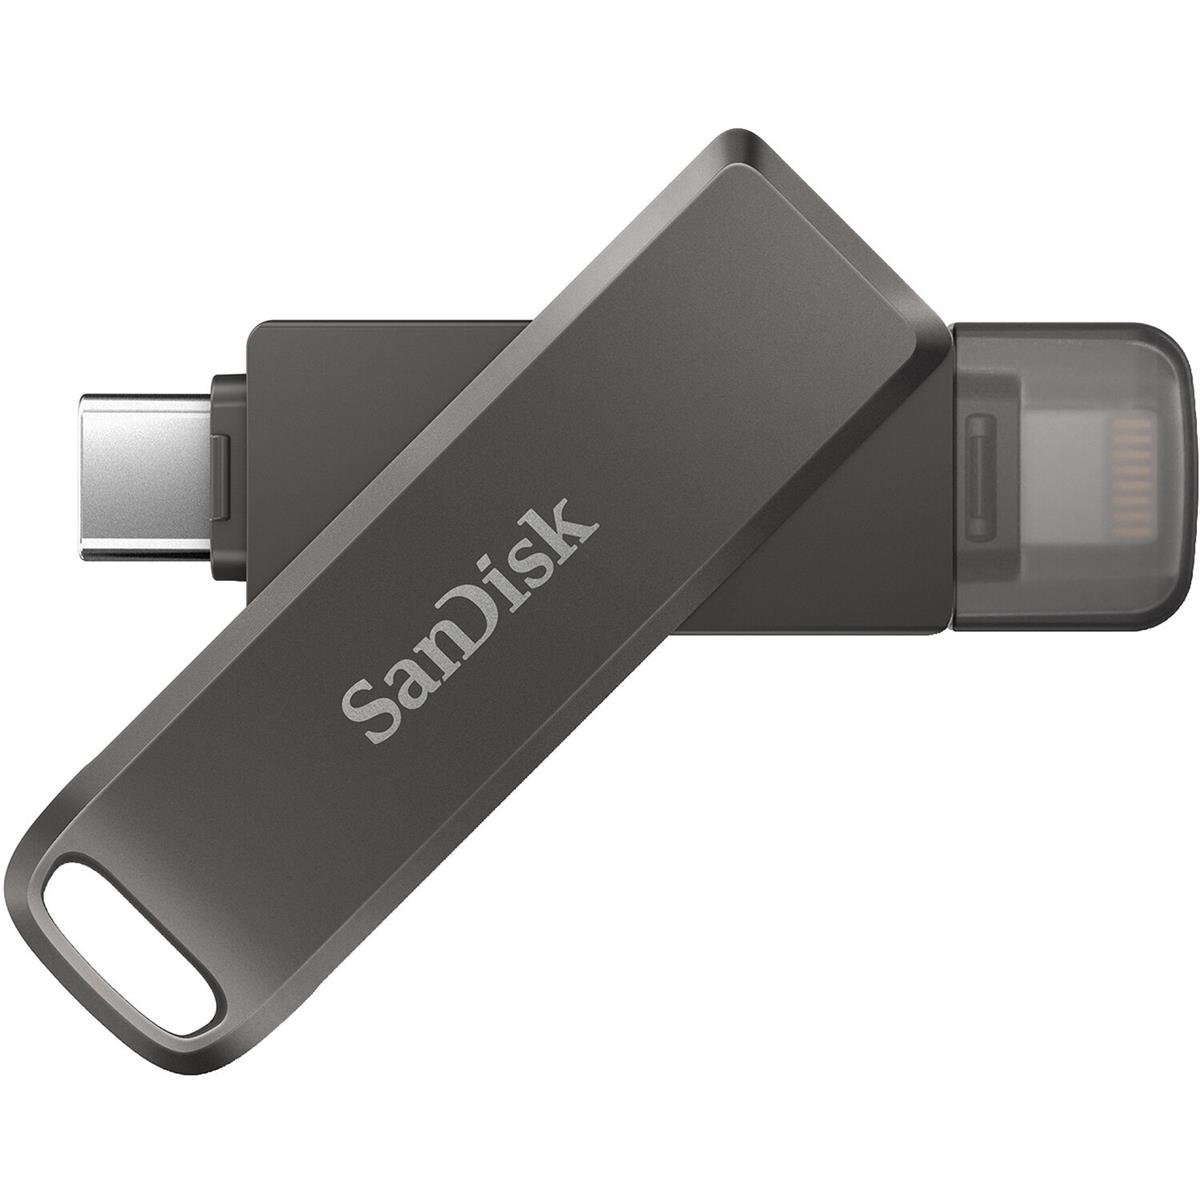 Image of SanDisk iXpand Luxe 64GB Flash Drive